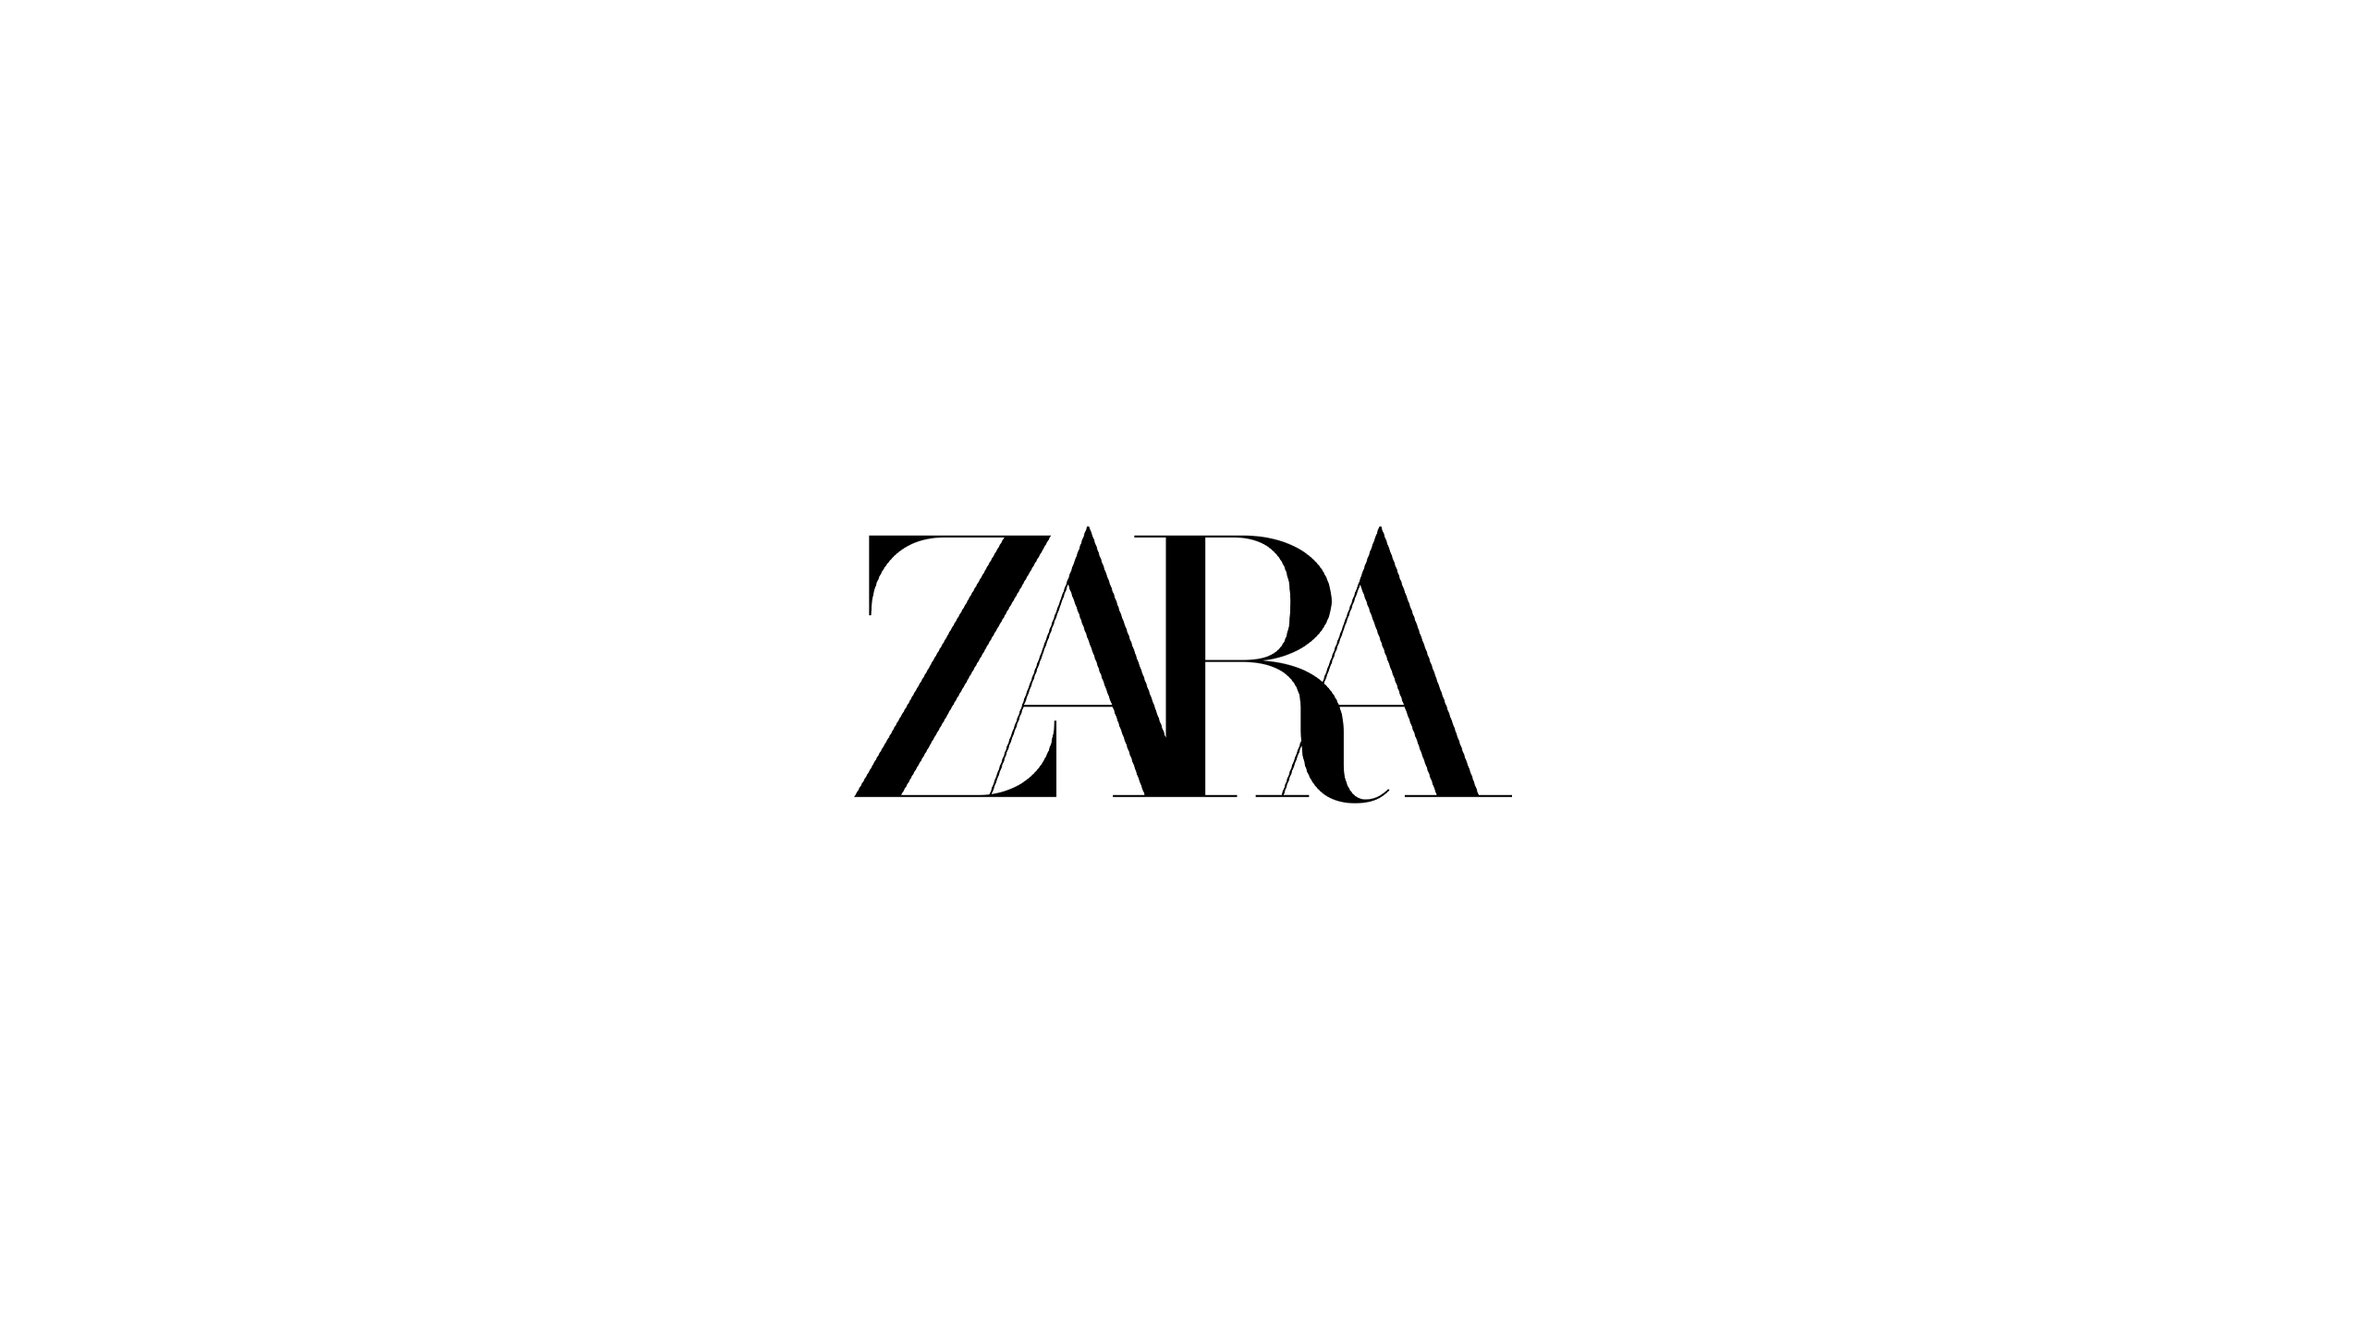 Models for Zara future project